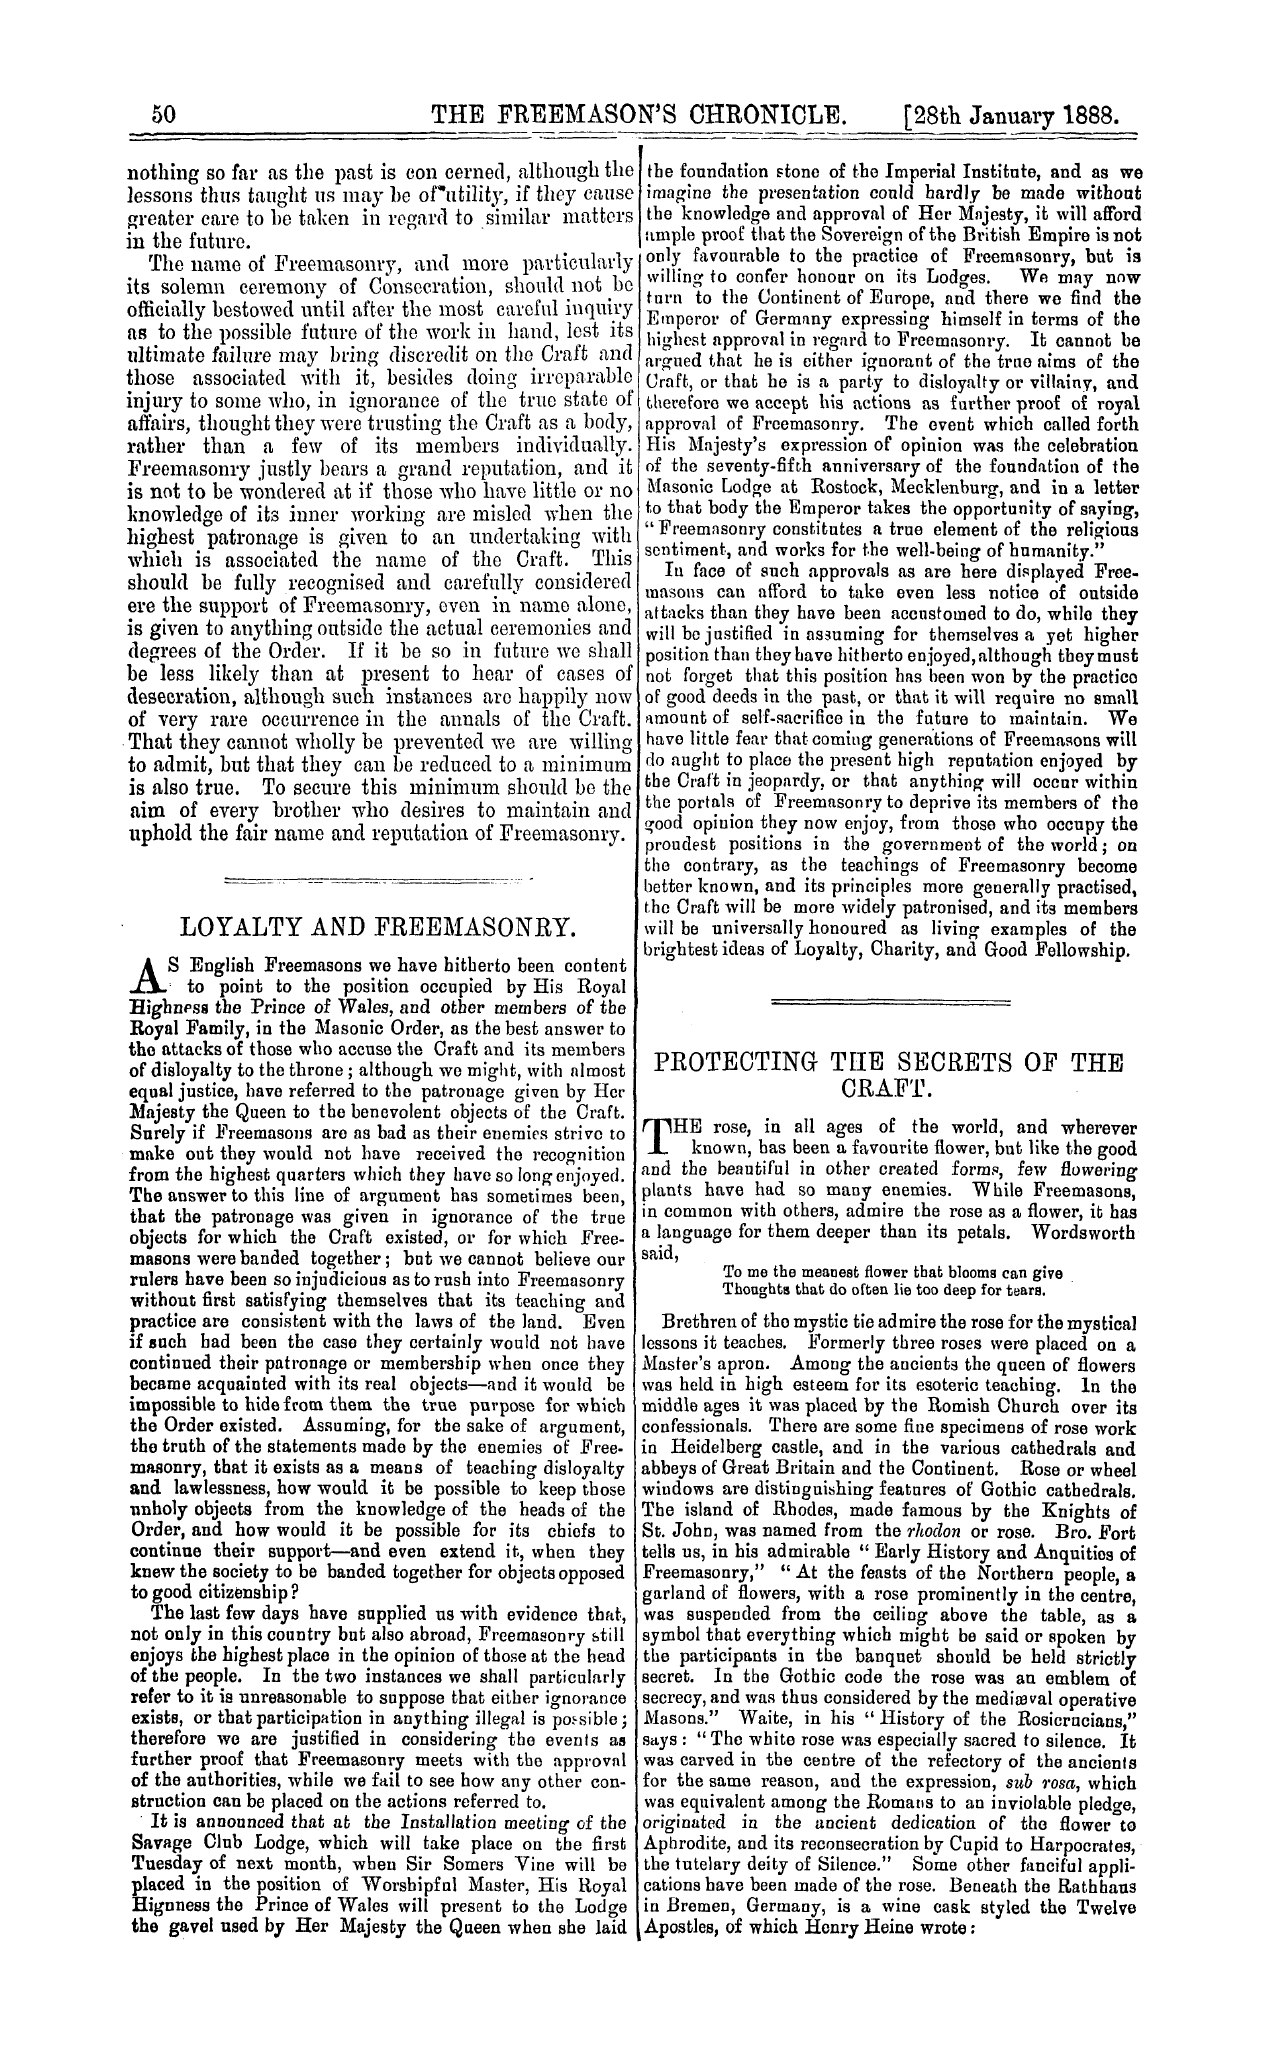 The Freemason's Chronicle: 1888-01-28 - Consecration And Desecration.